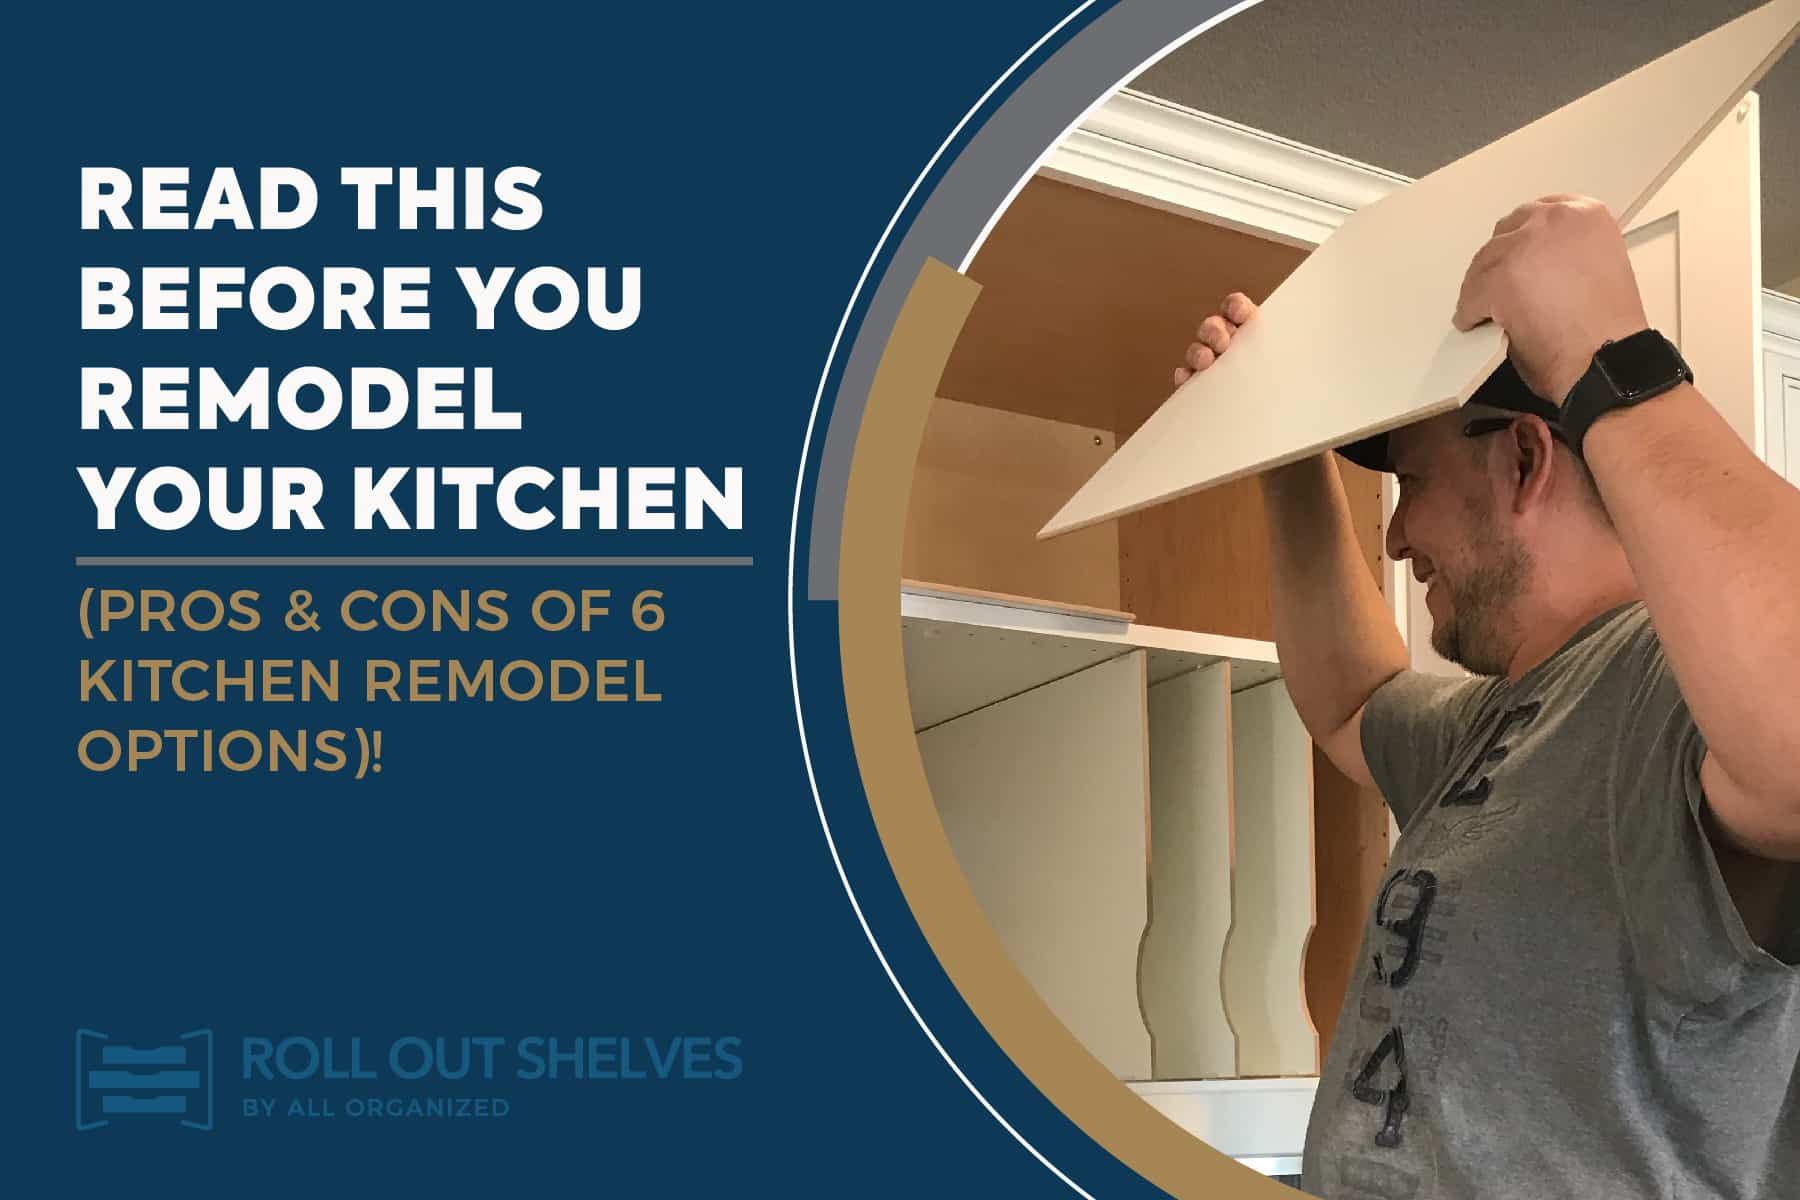 Read This Before You Remodel Your Kitchen (pros & cons of 6 kitchen remodel options)! 1